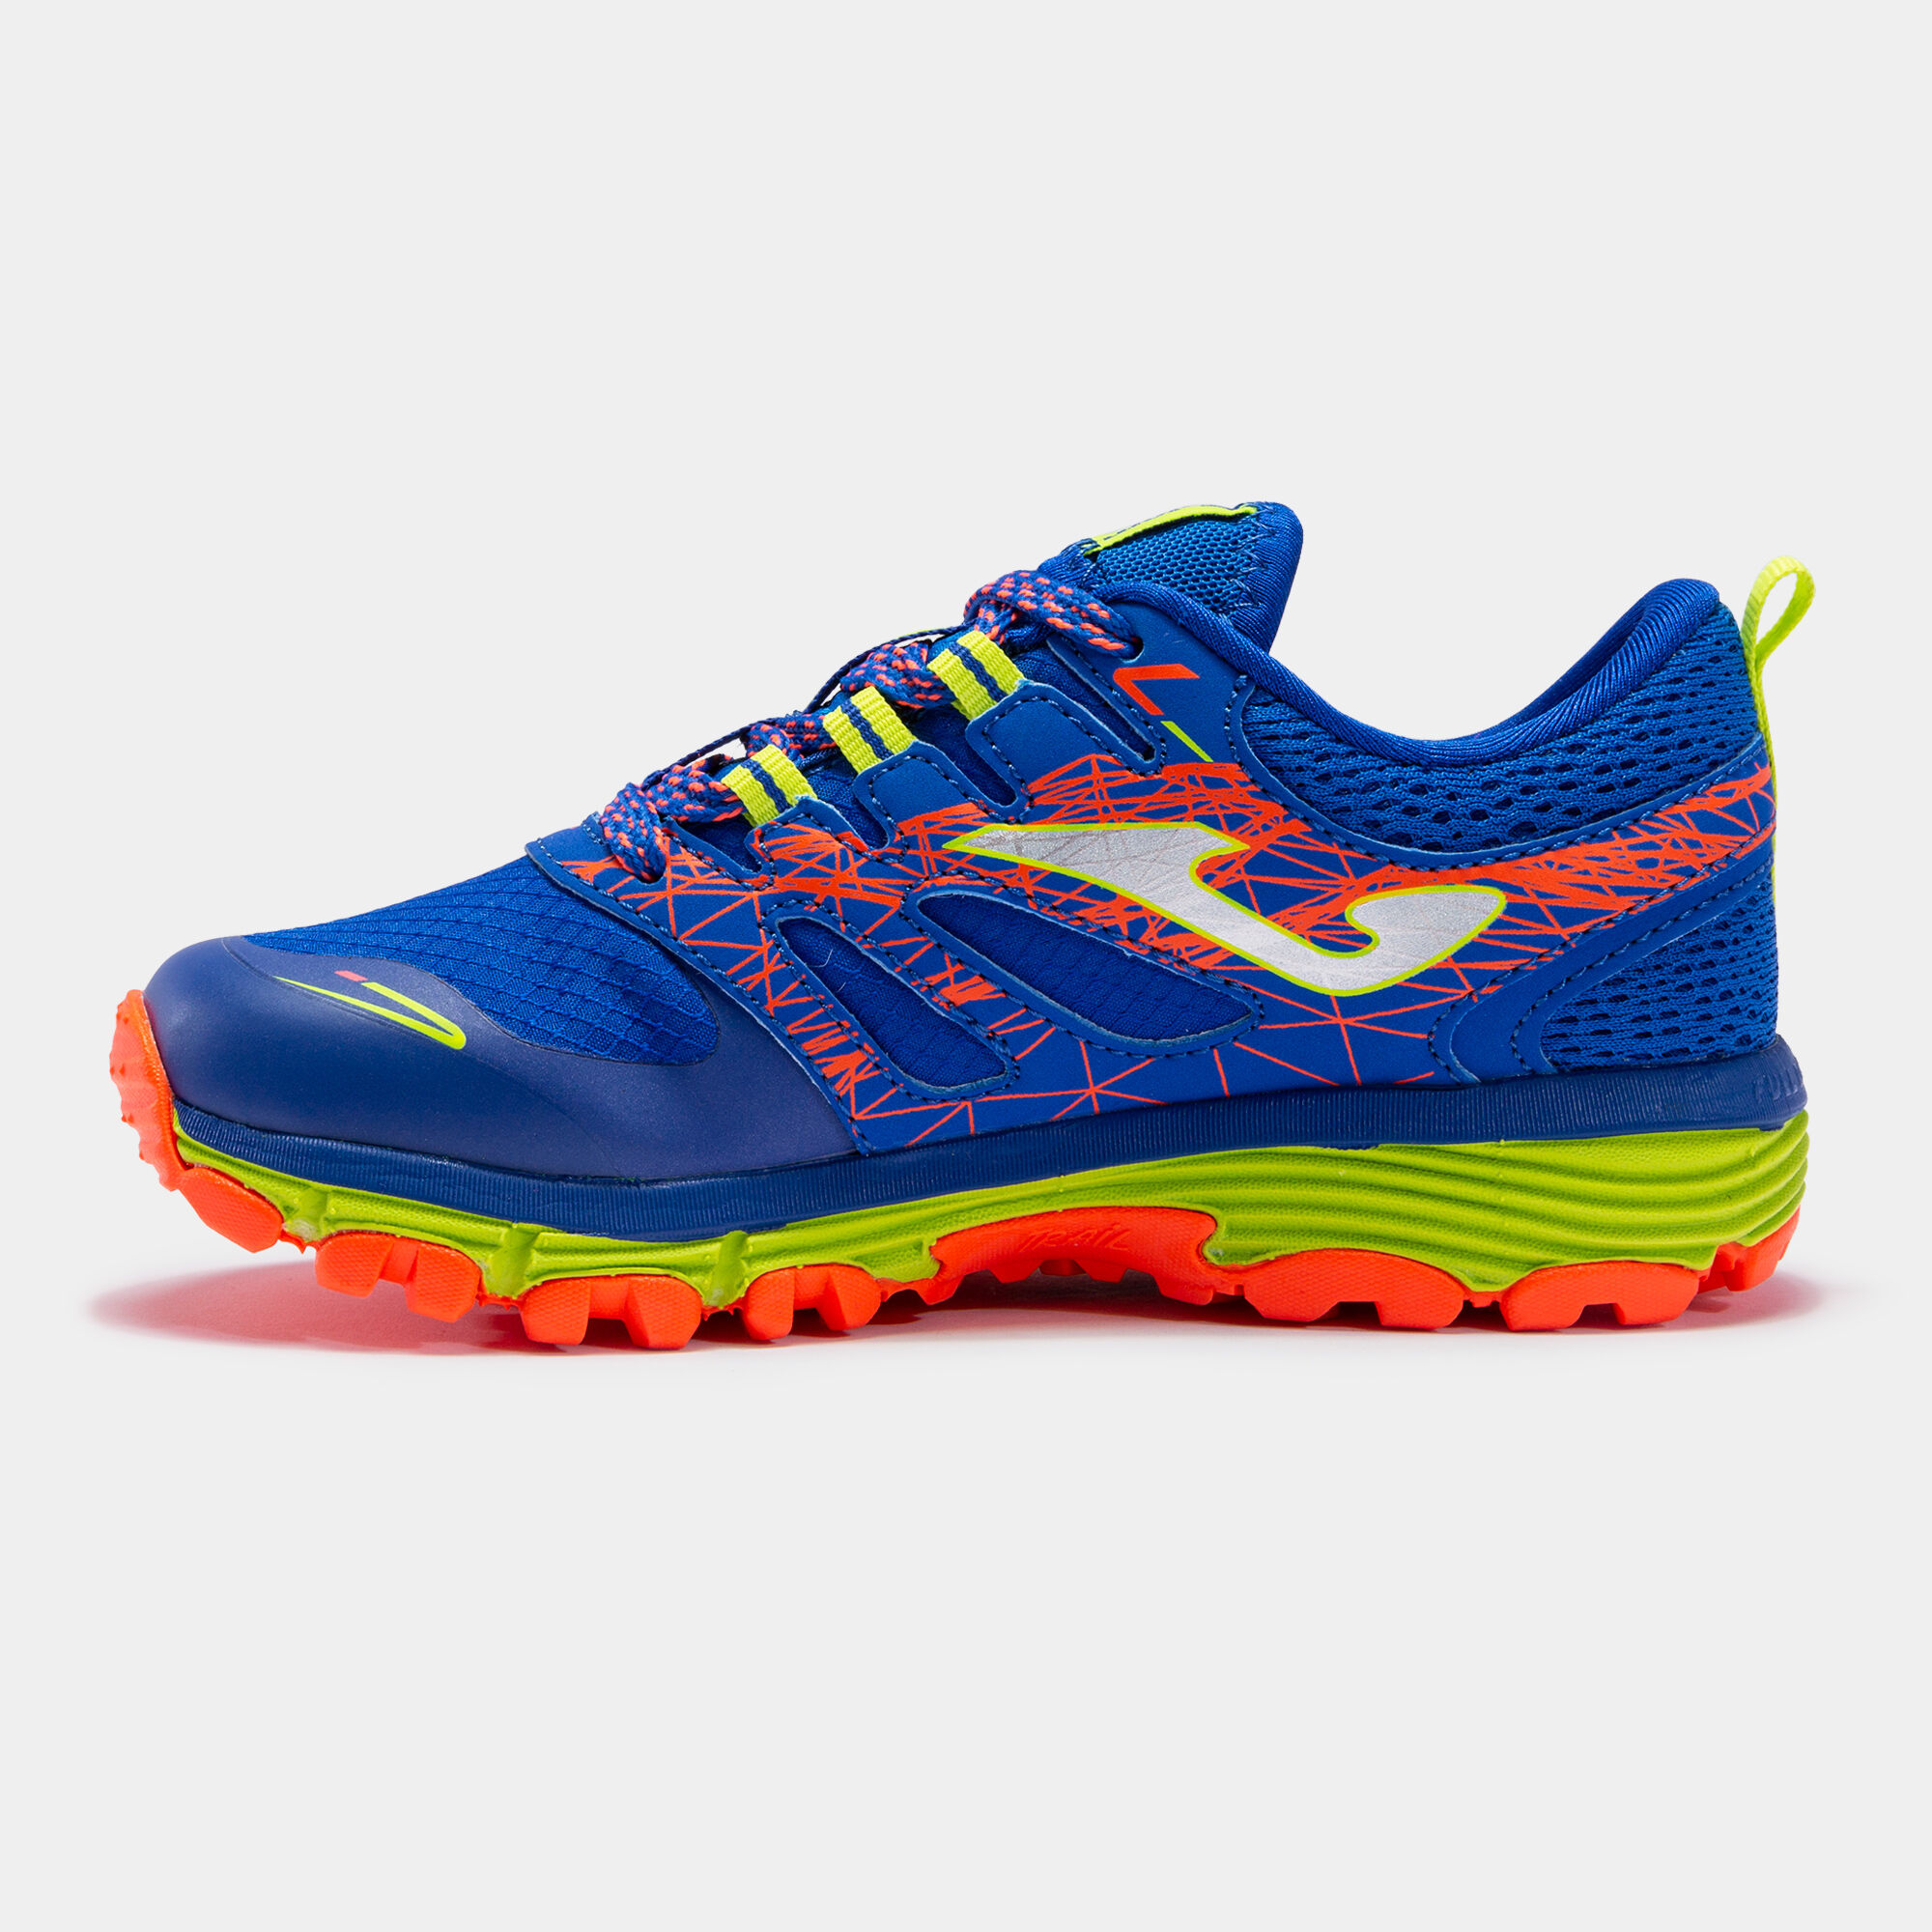 TRAIL-RUNNING SHOES SIMA 22 JUNIOR NAVY BLUE LIME